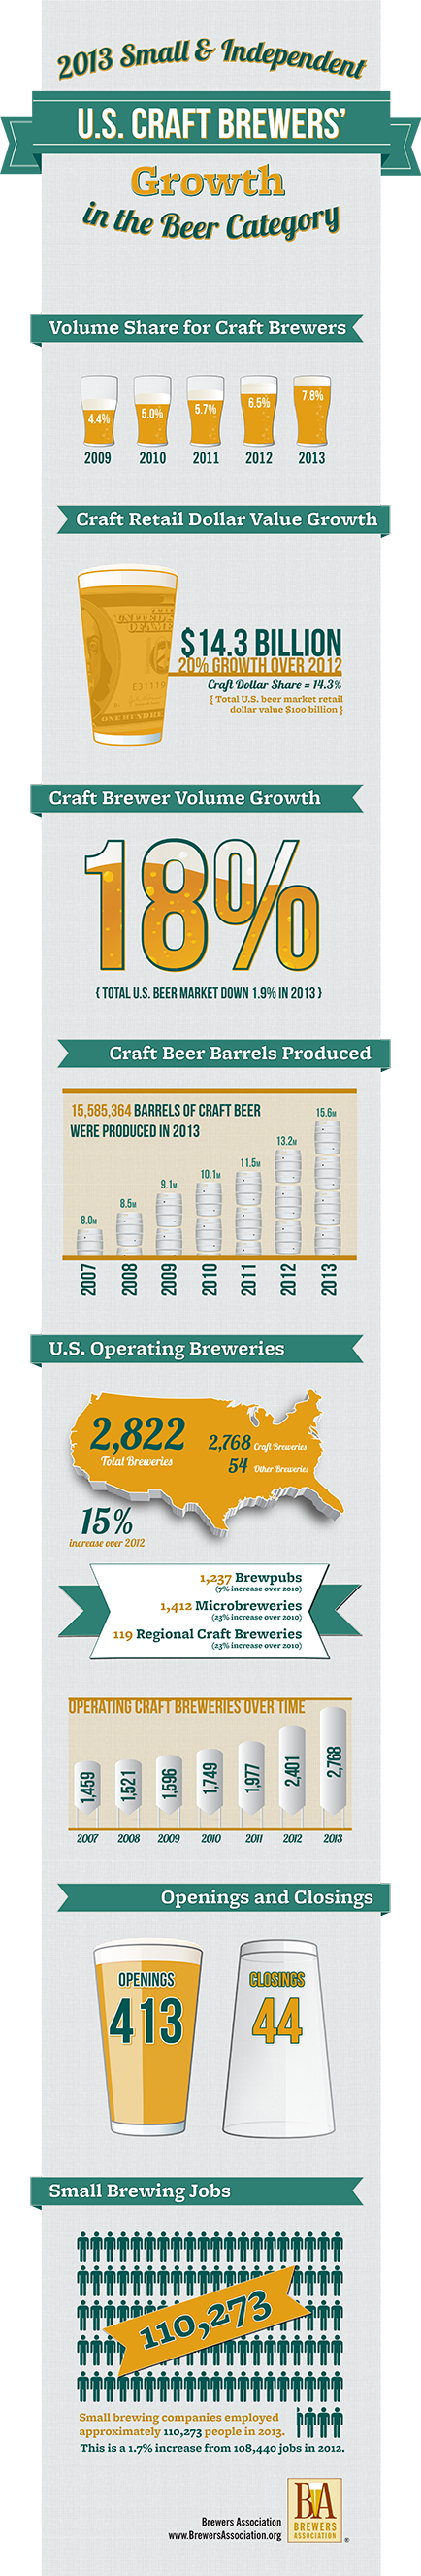 craftbeer growth infographic